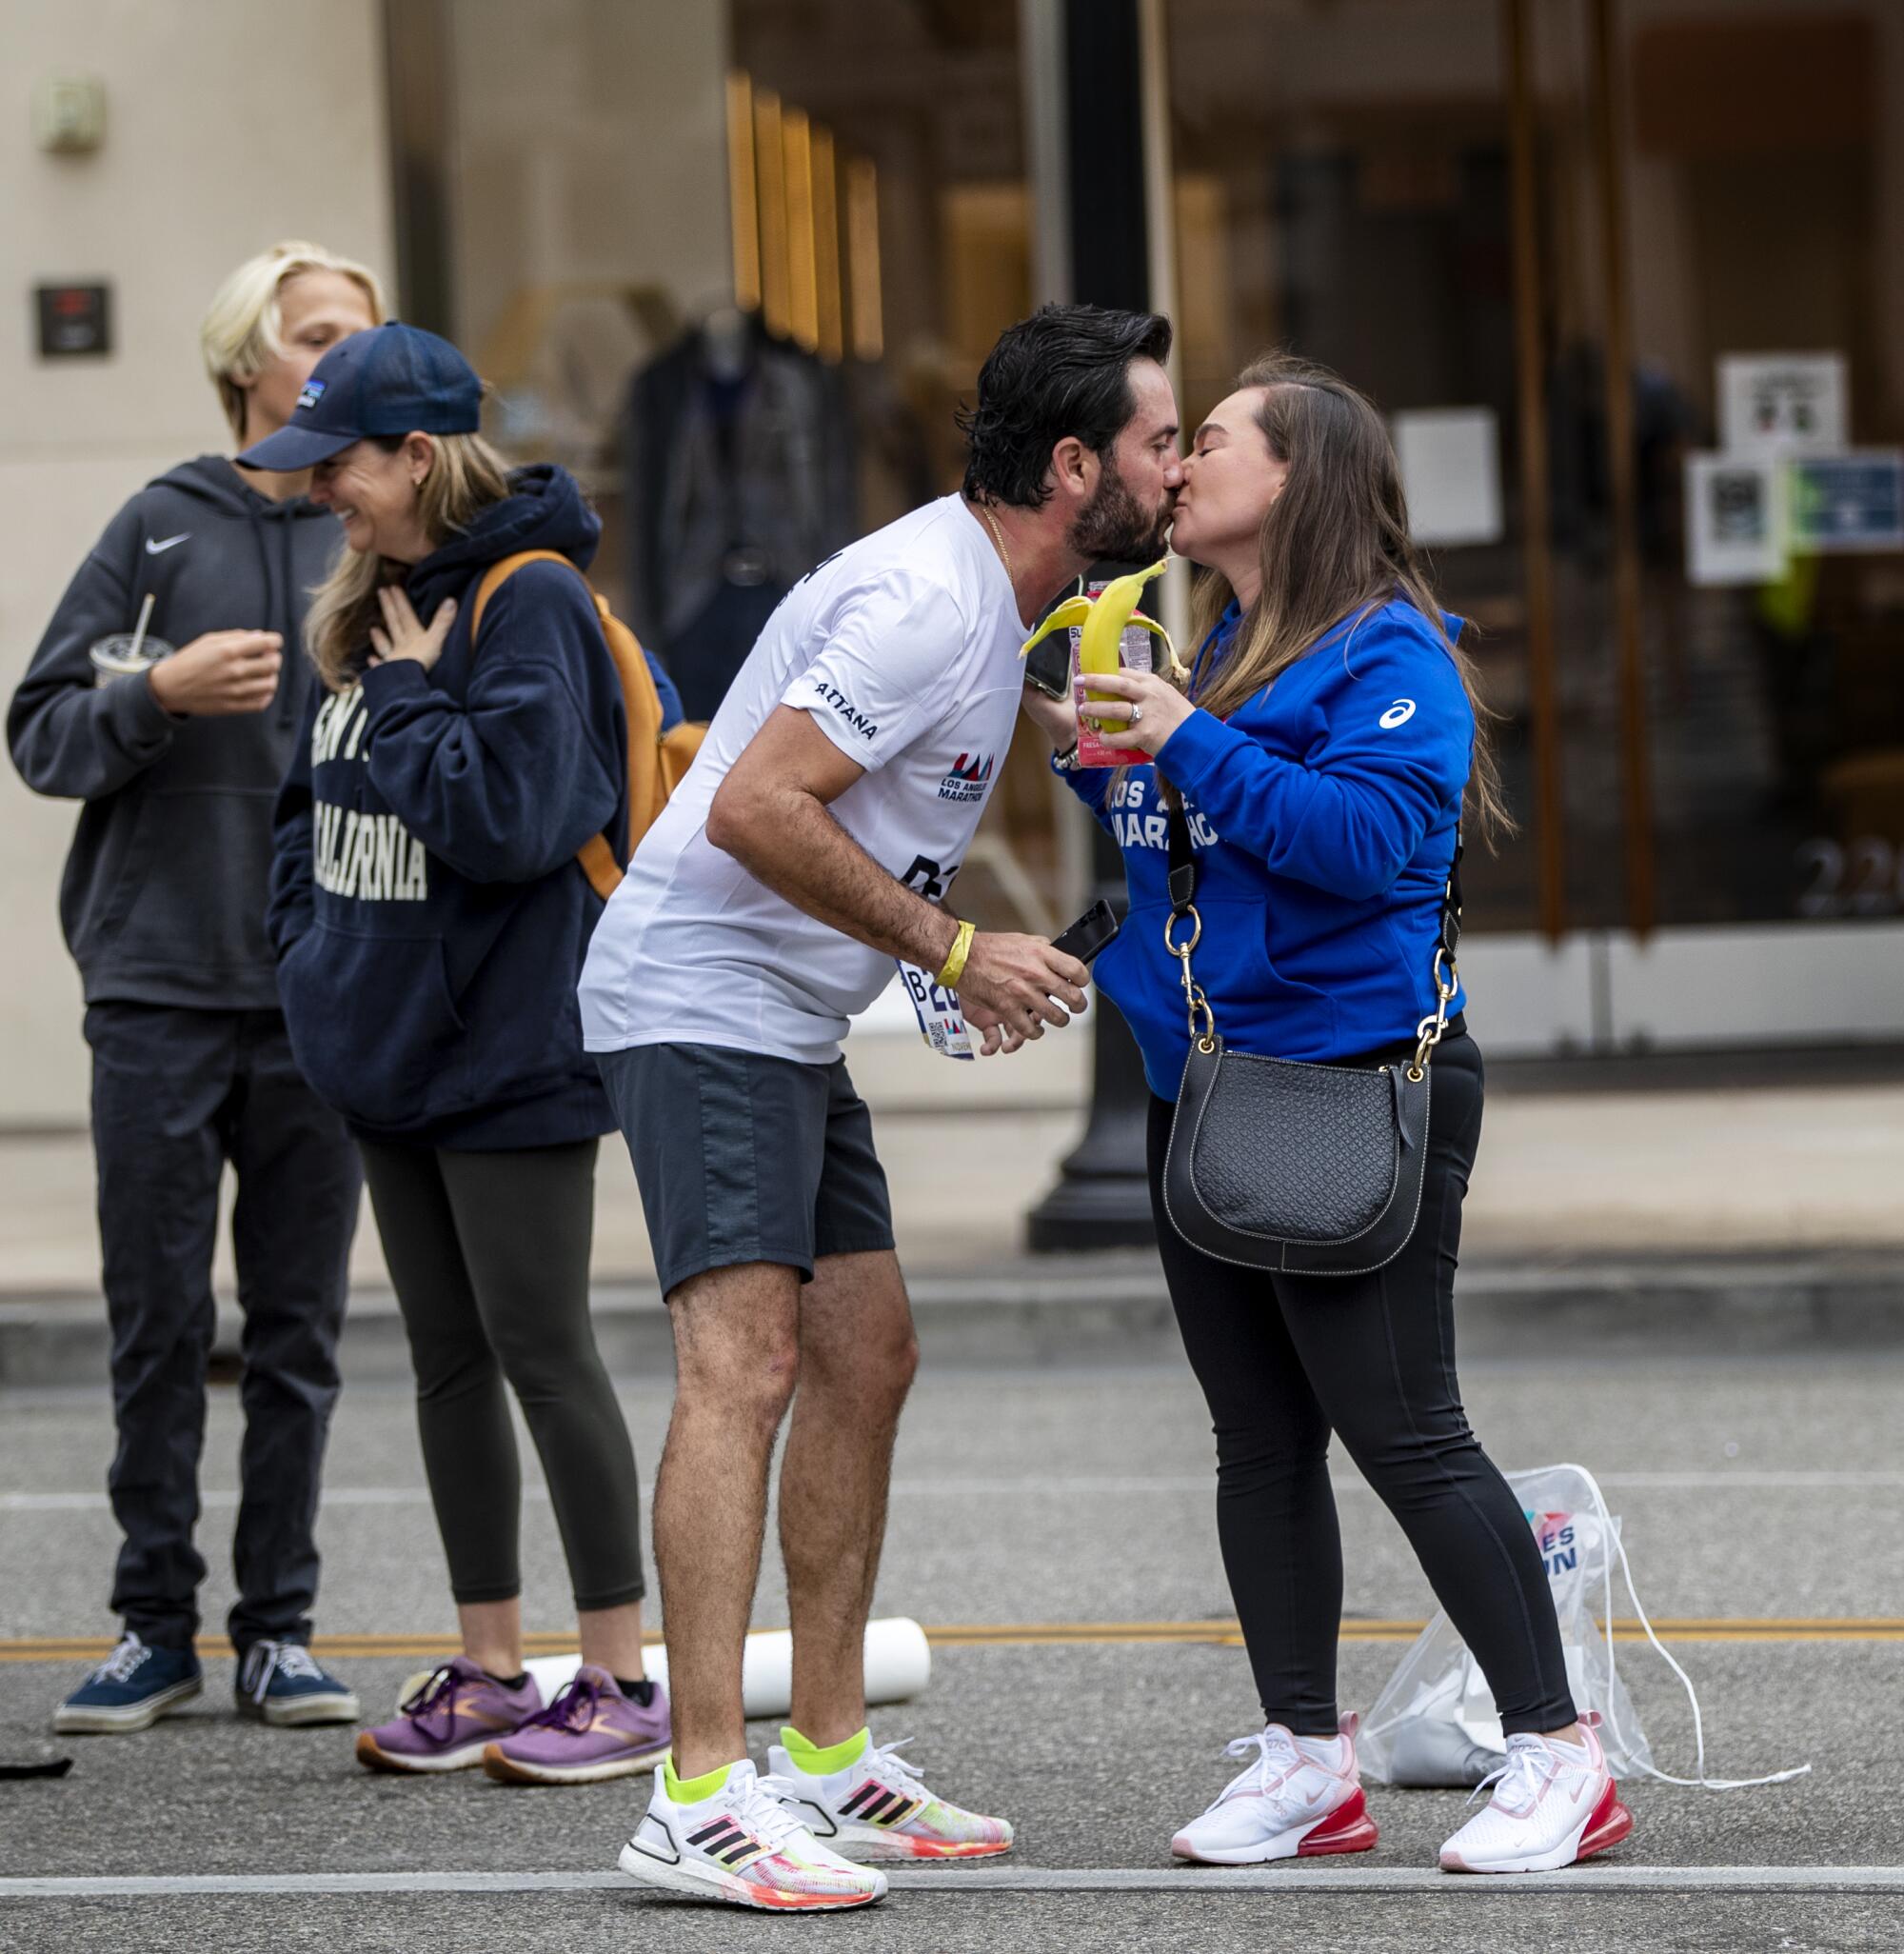 Runner Edsel Perez of Mexico City gets a kiss and a banana from his wife.